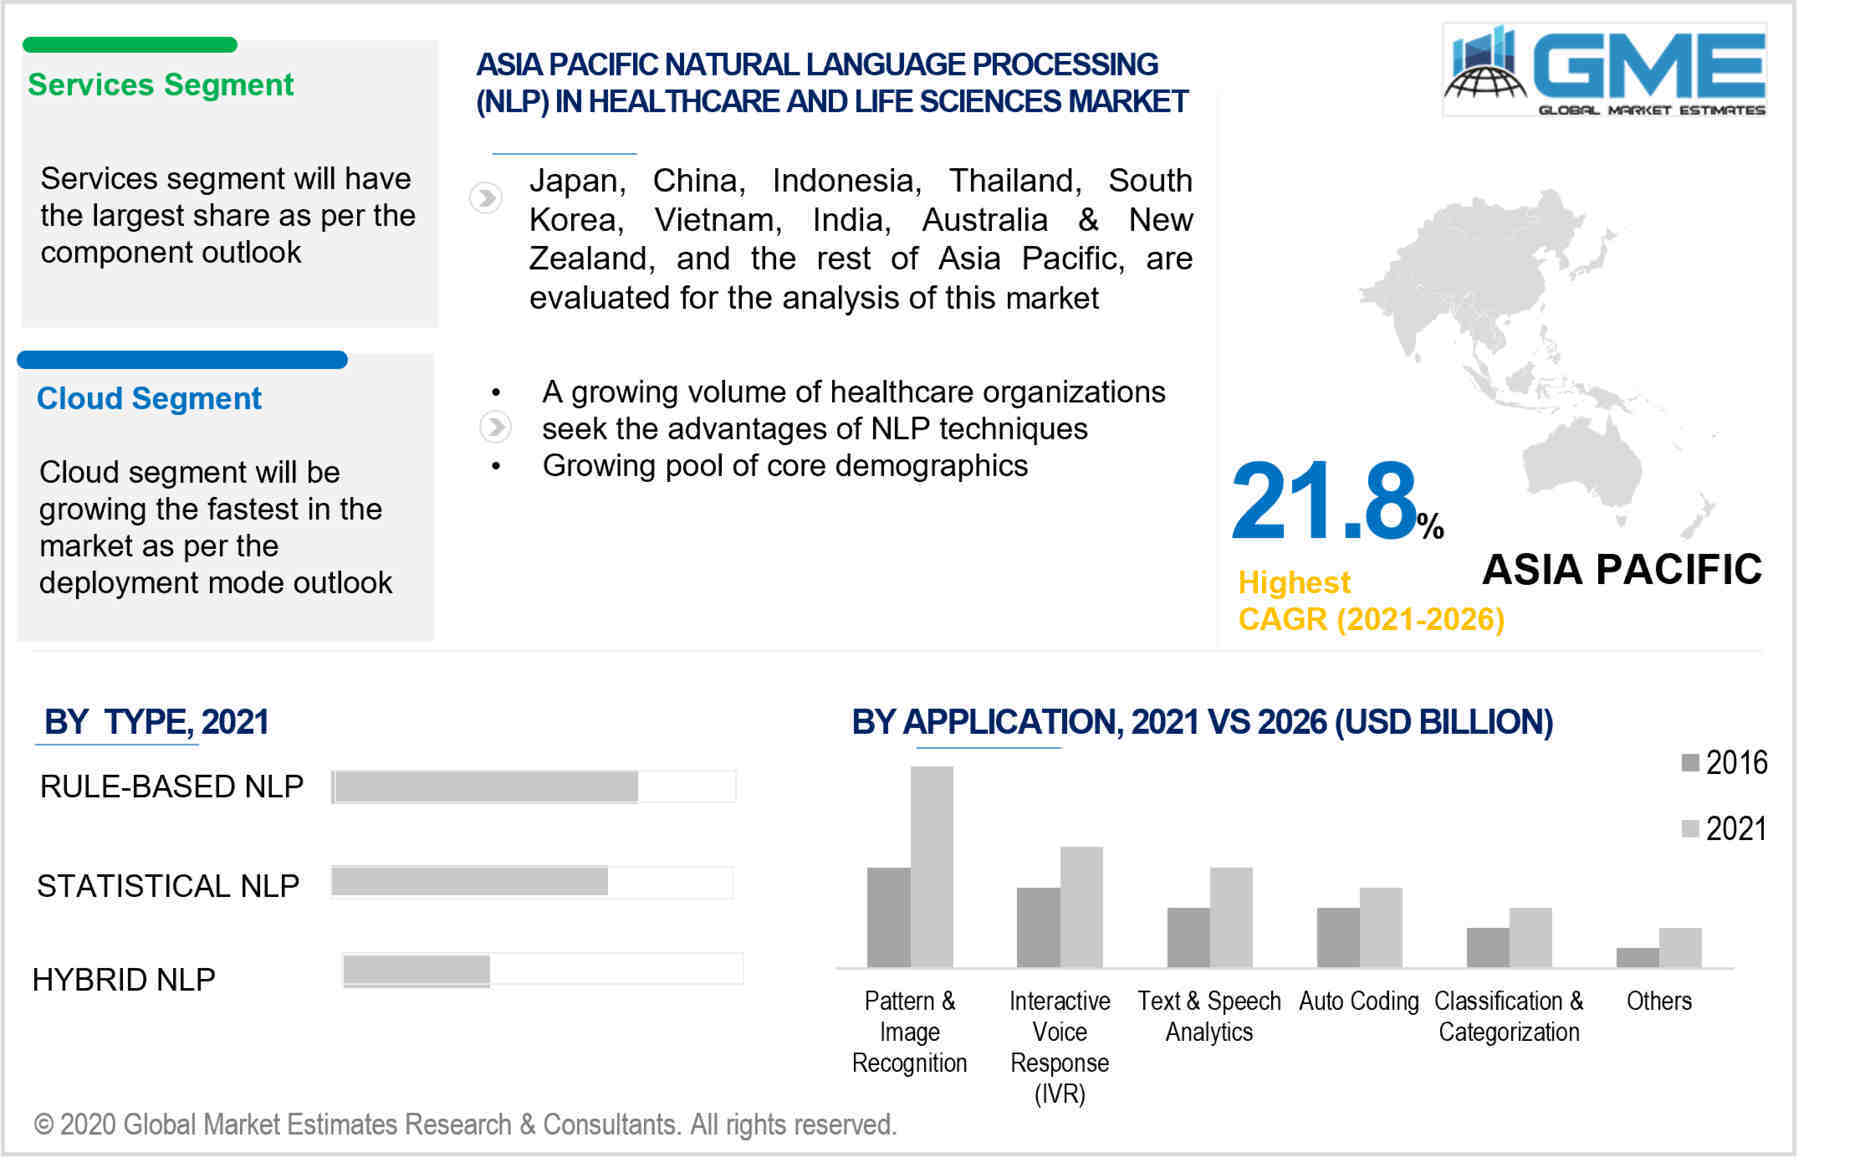 asia pacific natural language processing (nlp) in healthcare and life sciences market